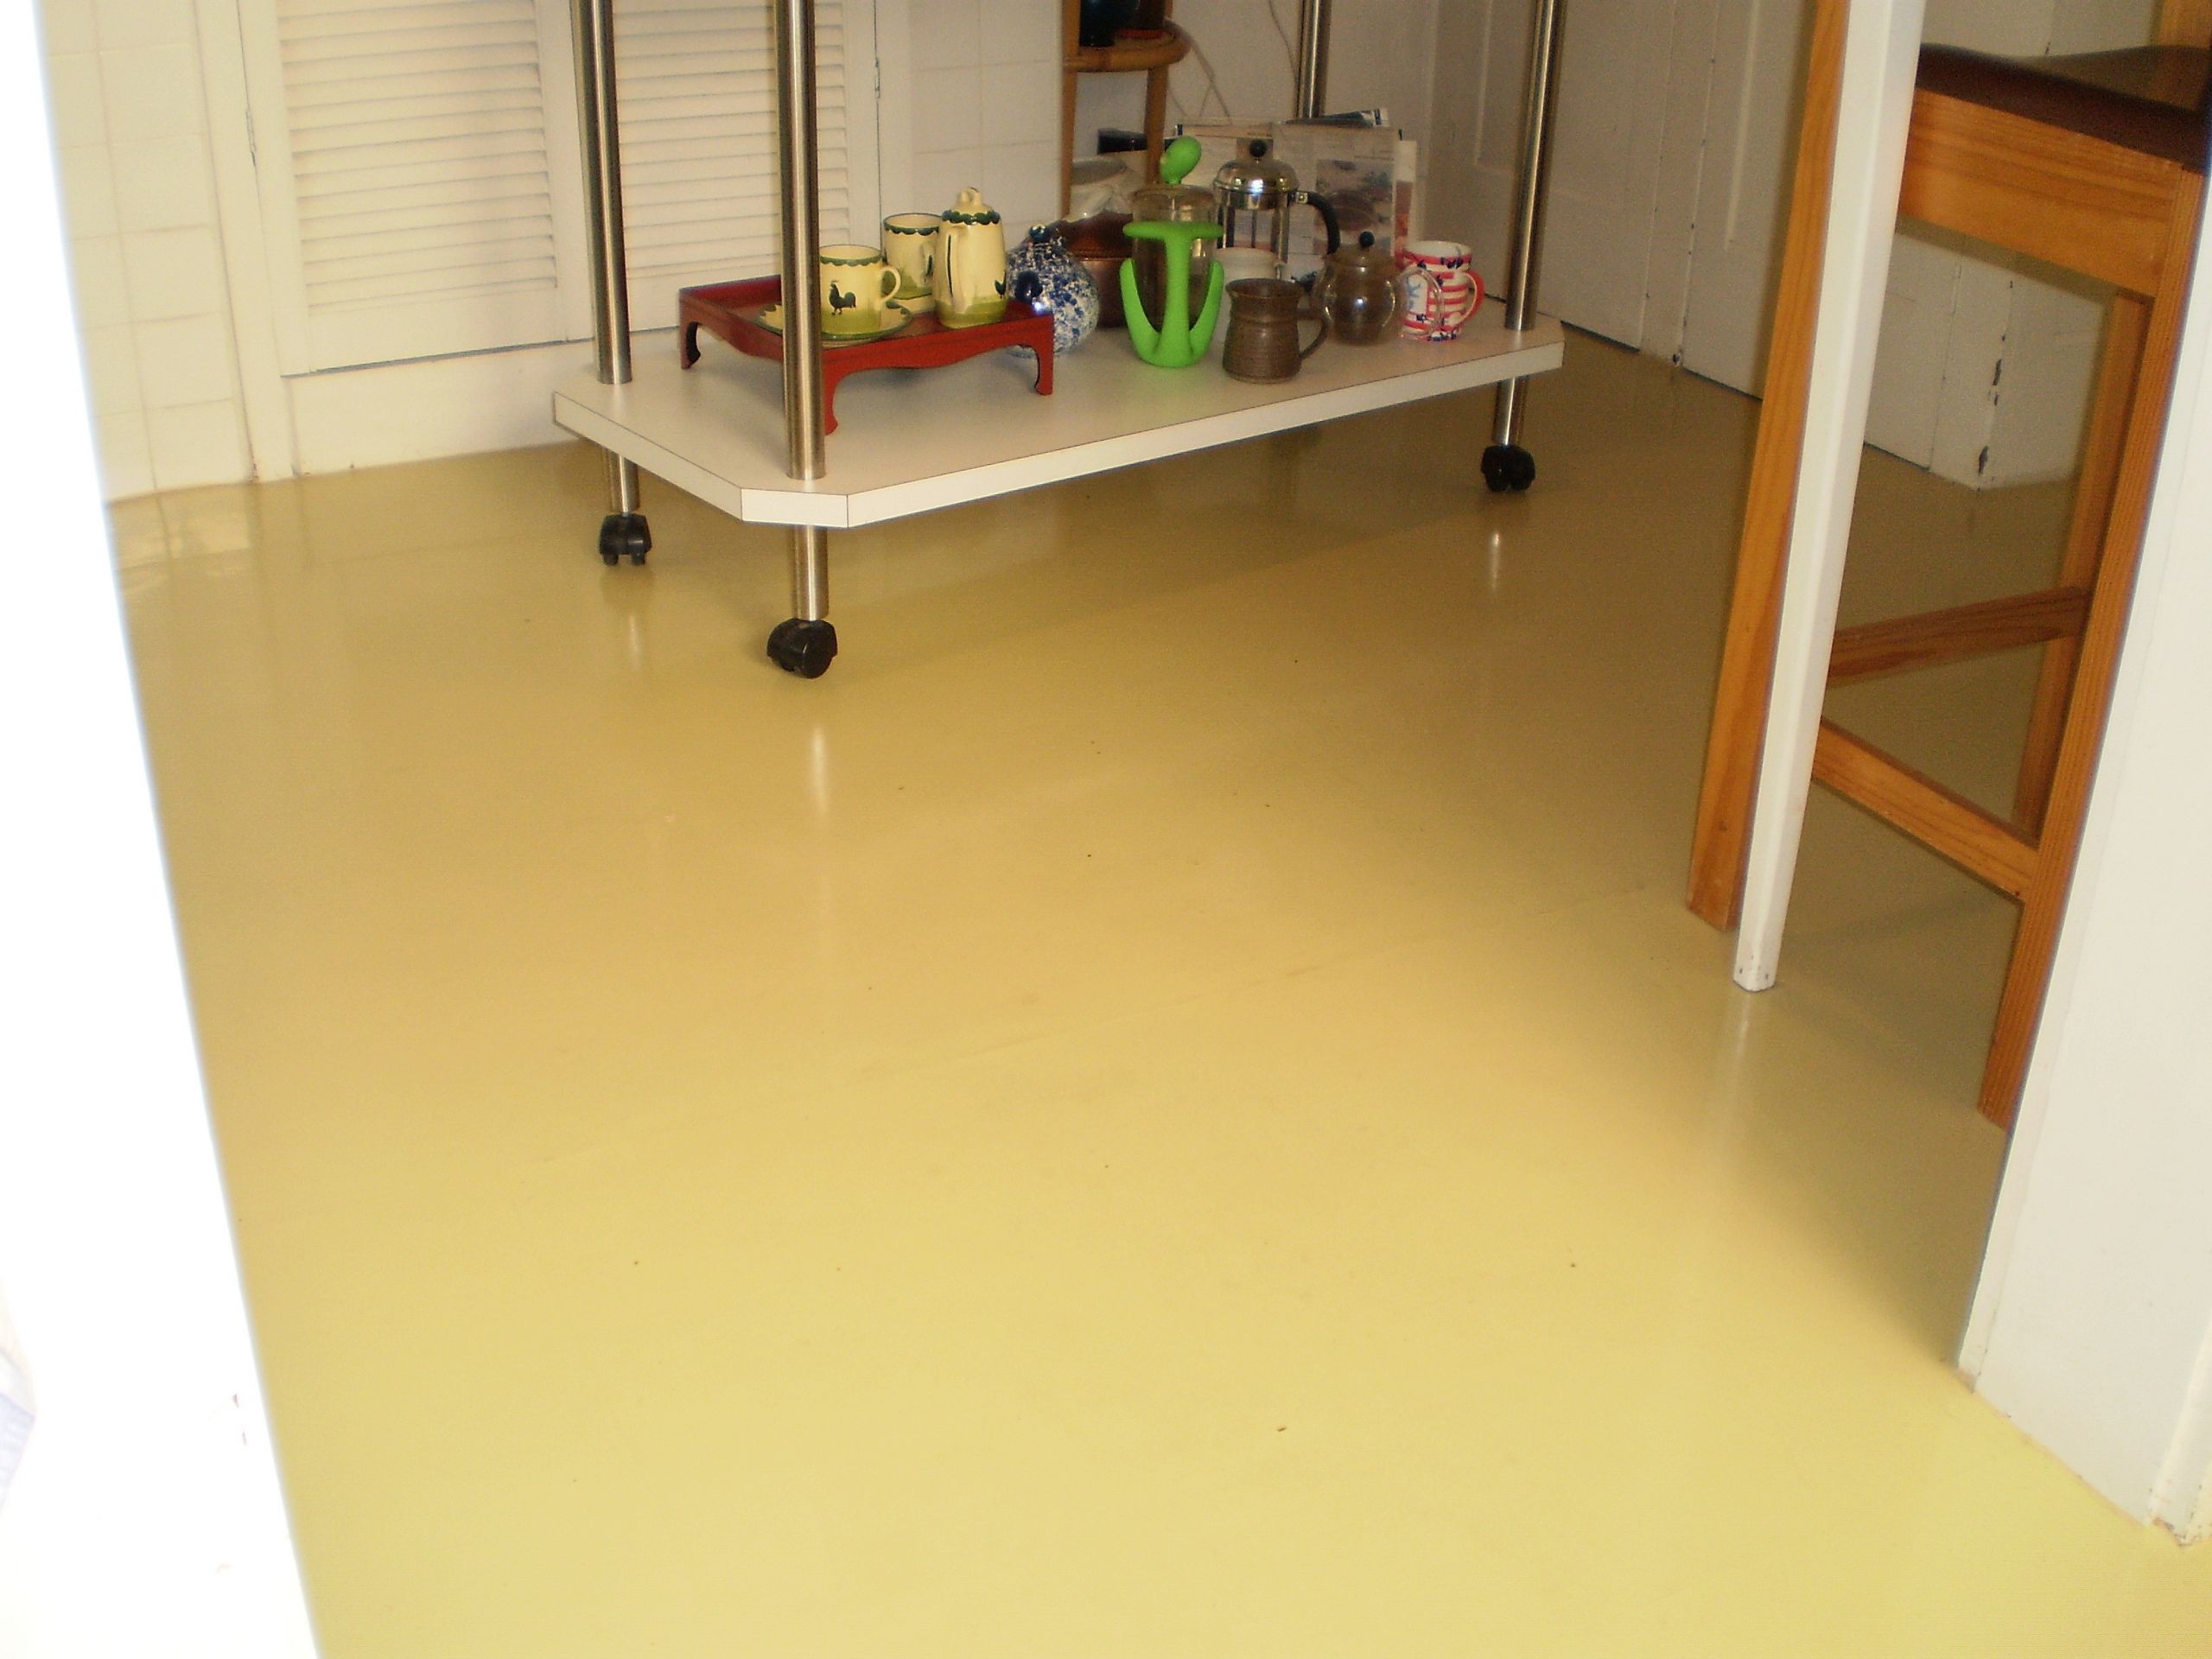 Rubber Flooring For Kitchen Awesome Home Improvement Pages Page Not Found Of Rubber Flooring For Kitchen Scaled 